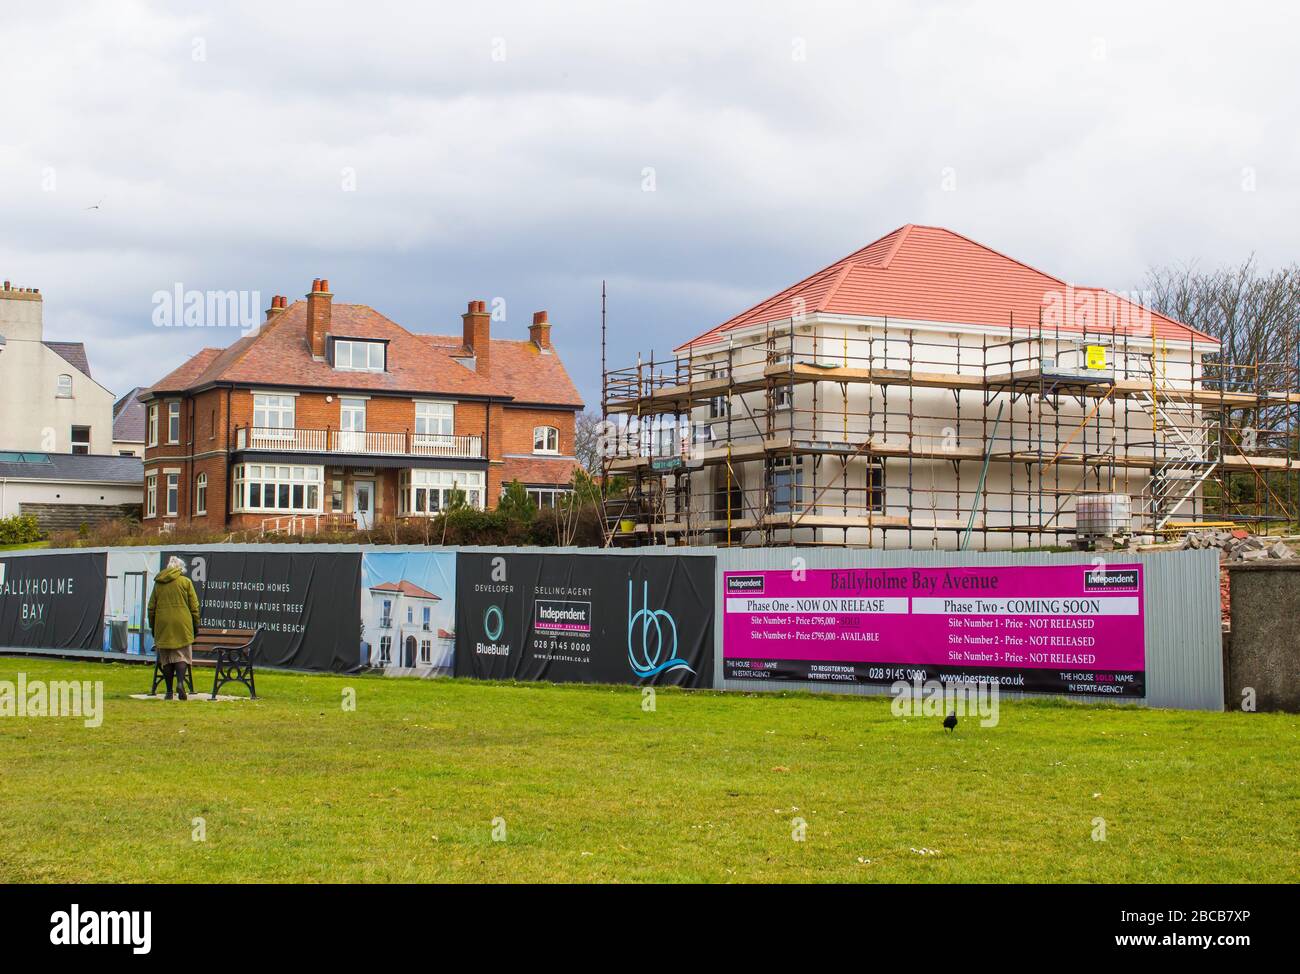 19 March 2020 A building property development sign with new houses erected by Independent Property Estates and advertising luxury properties for sale Stock Photo